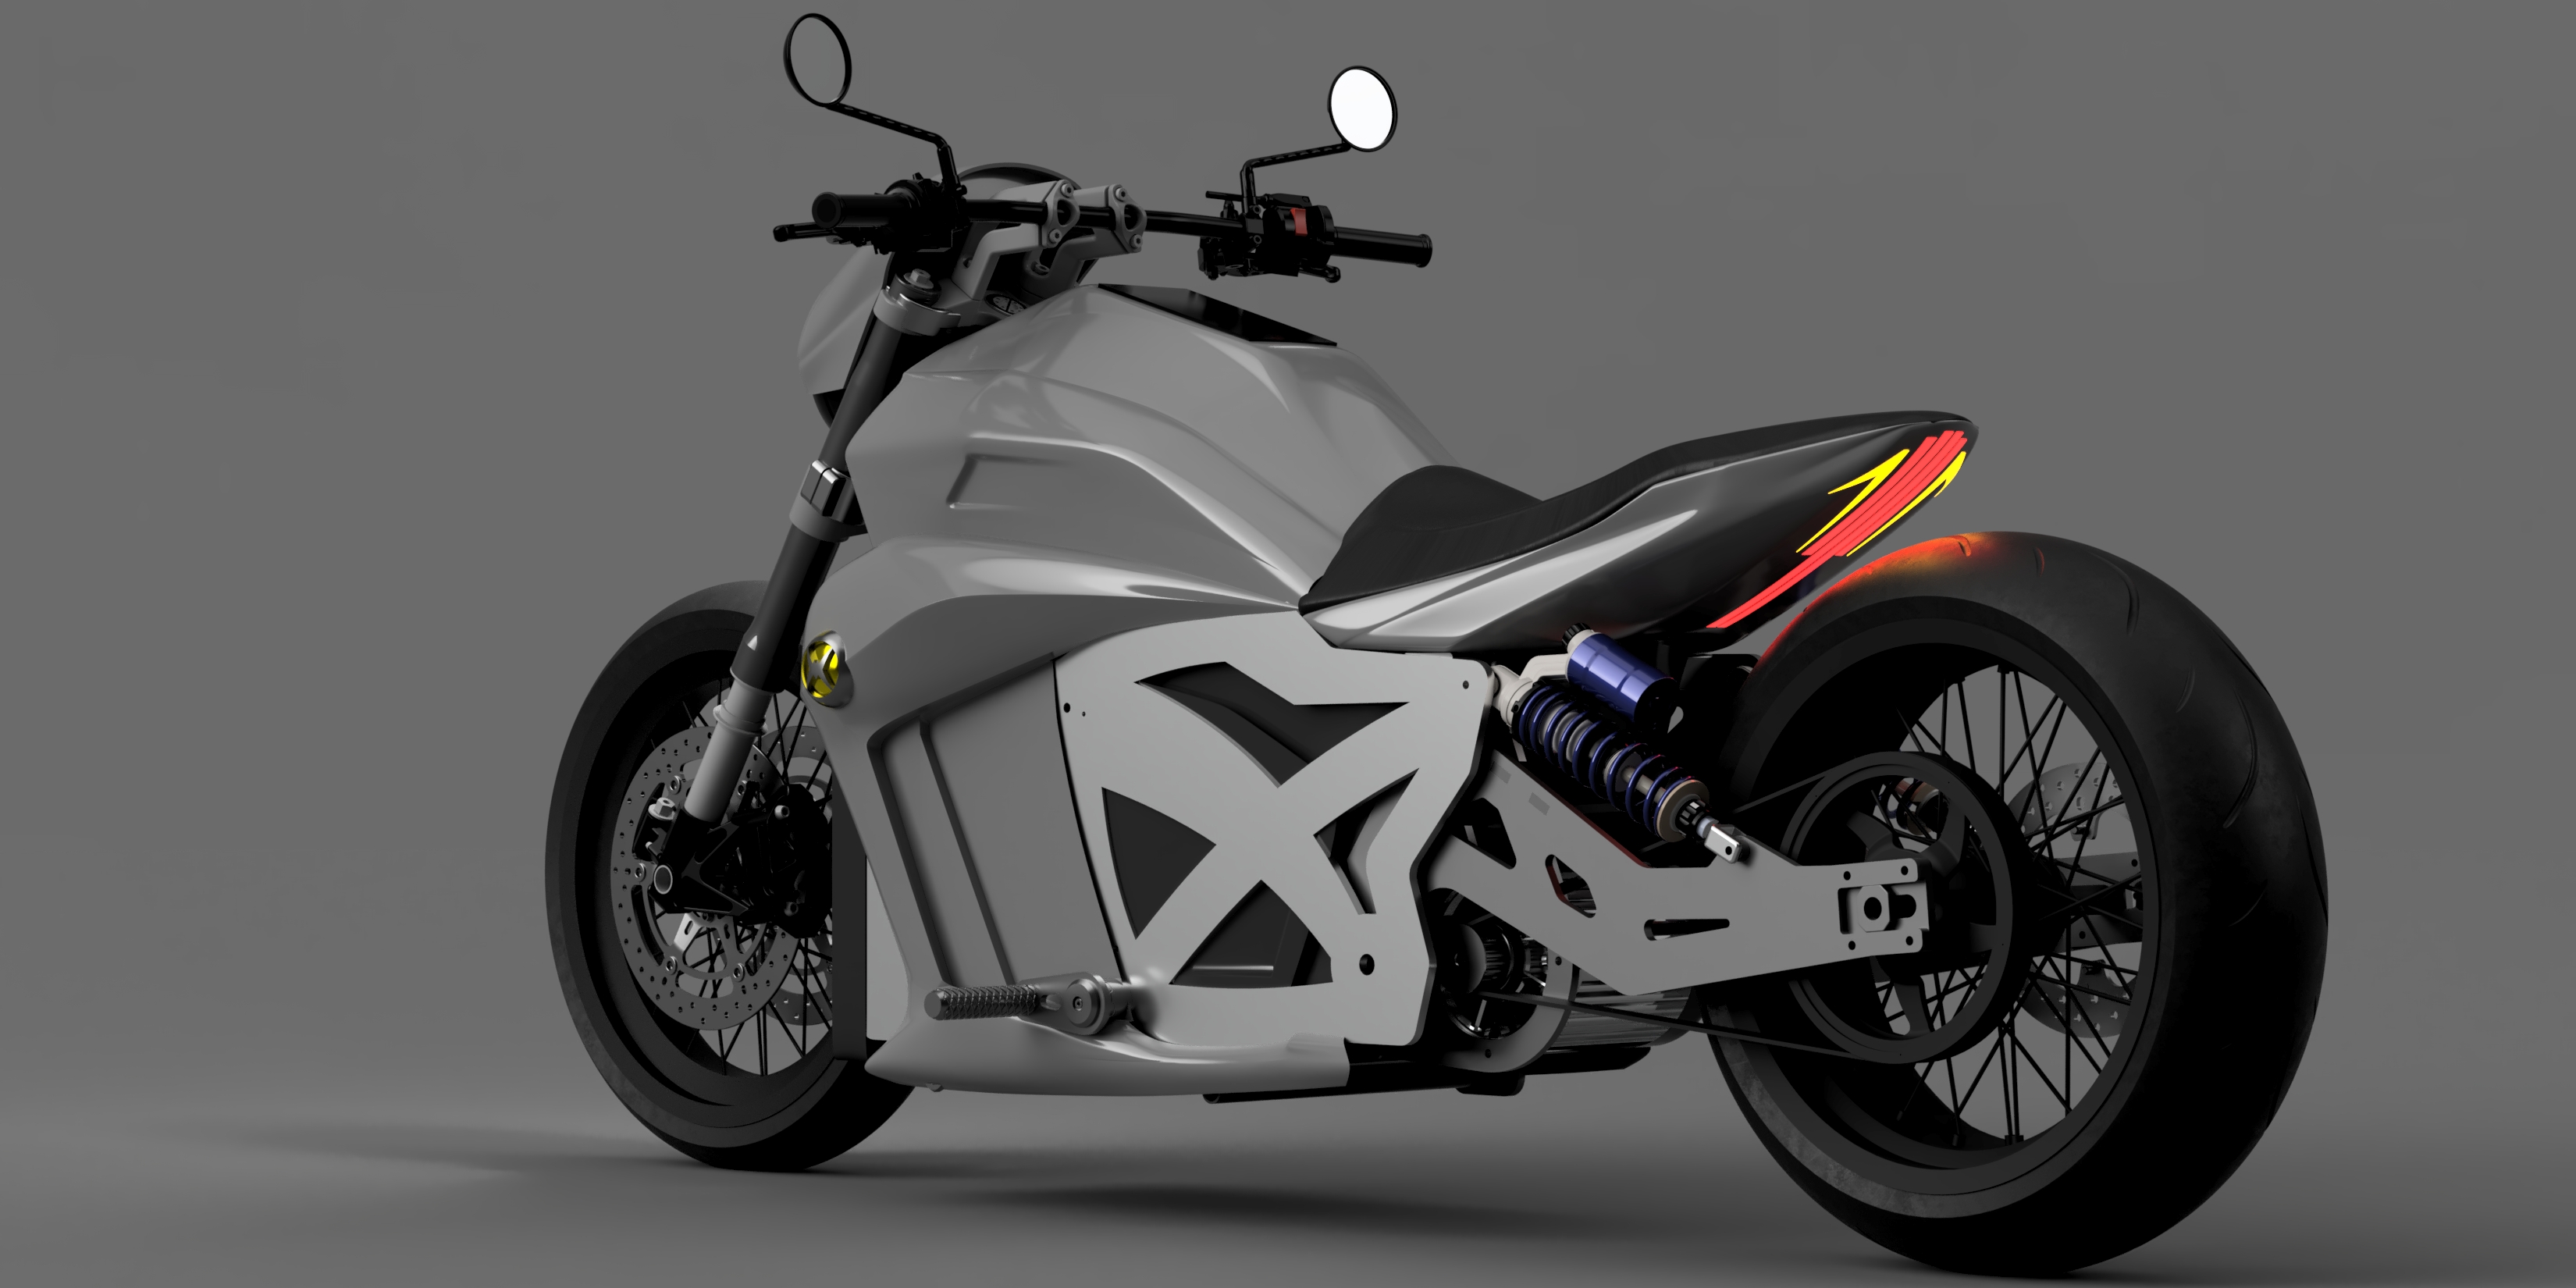 Evoke Motorcycles unveils new 120 kW electric cruiser design with 0-80%